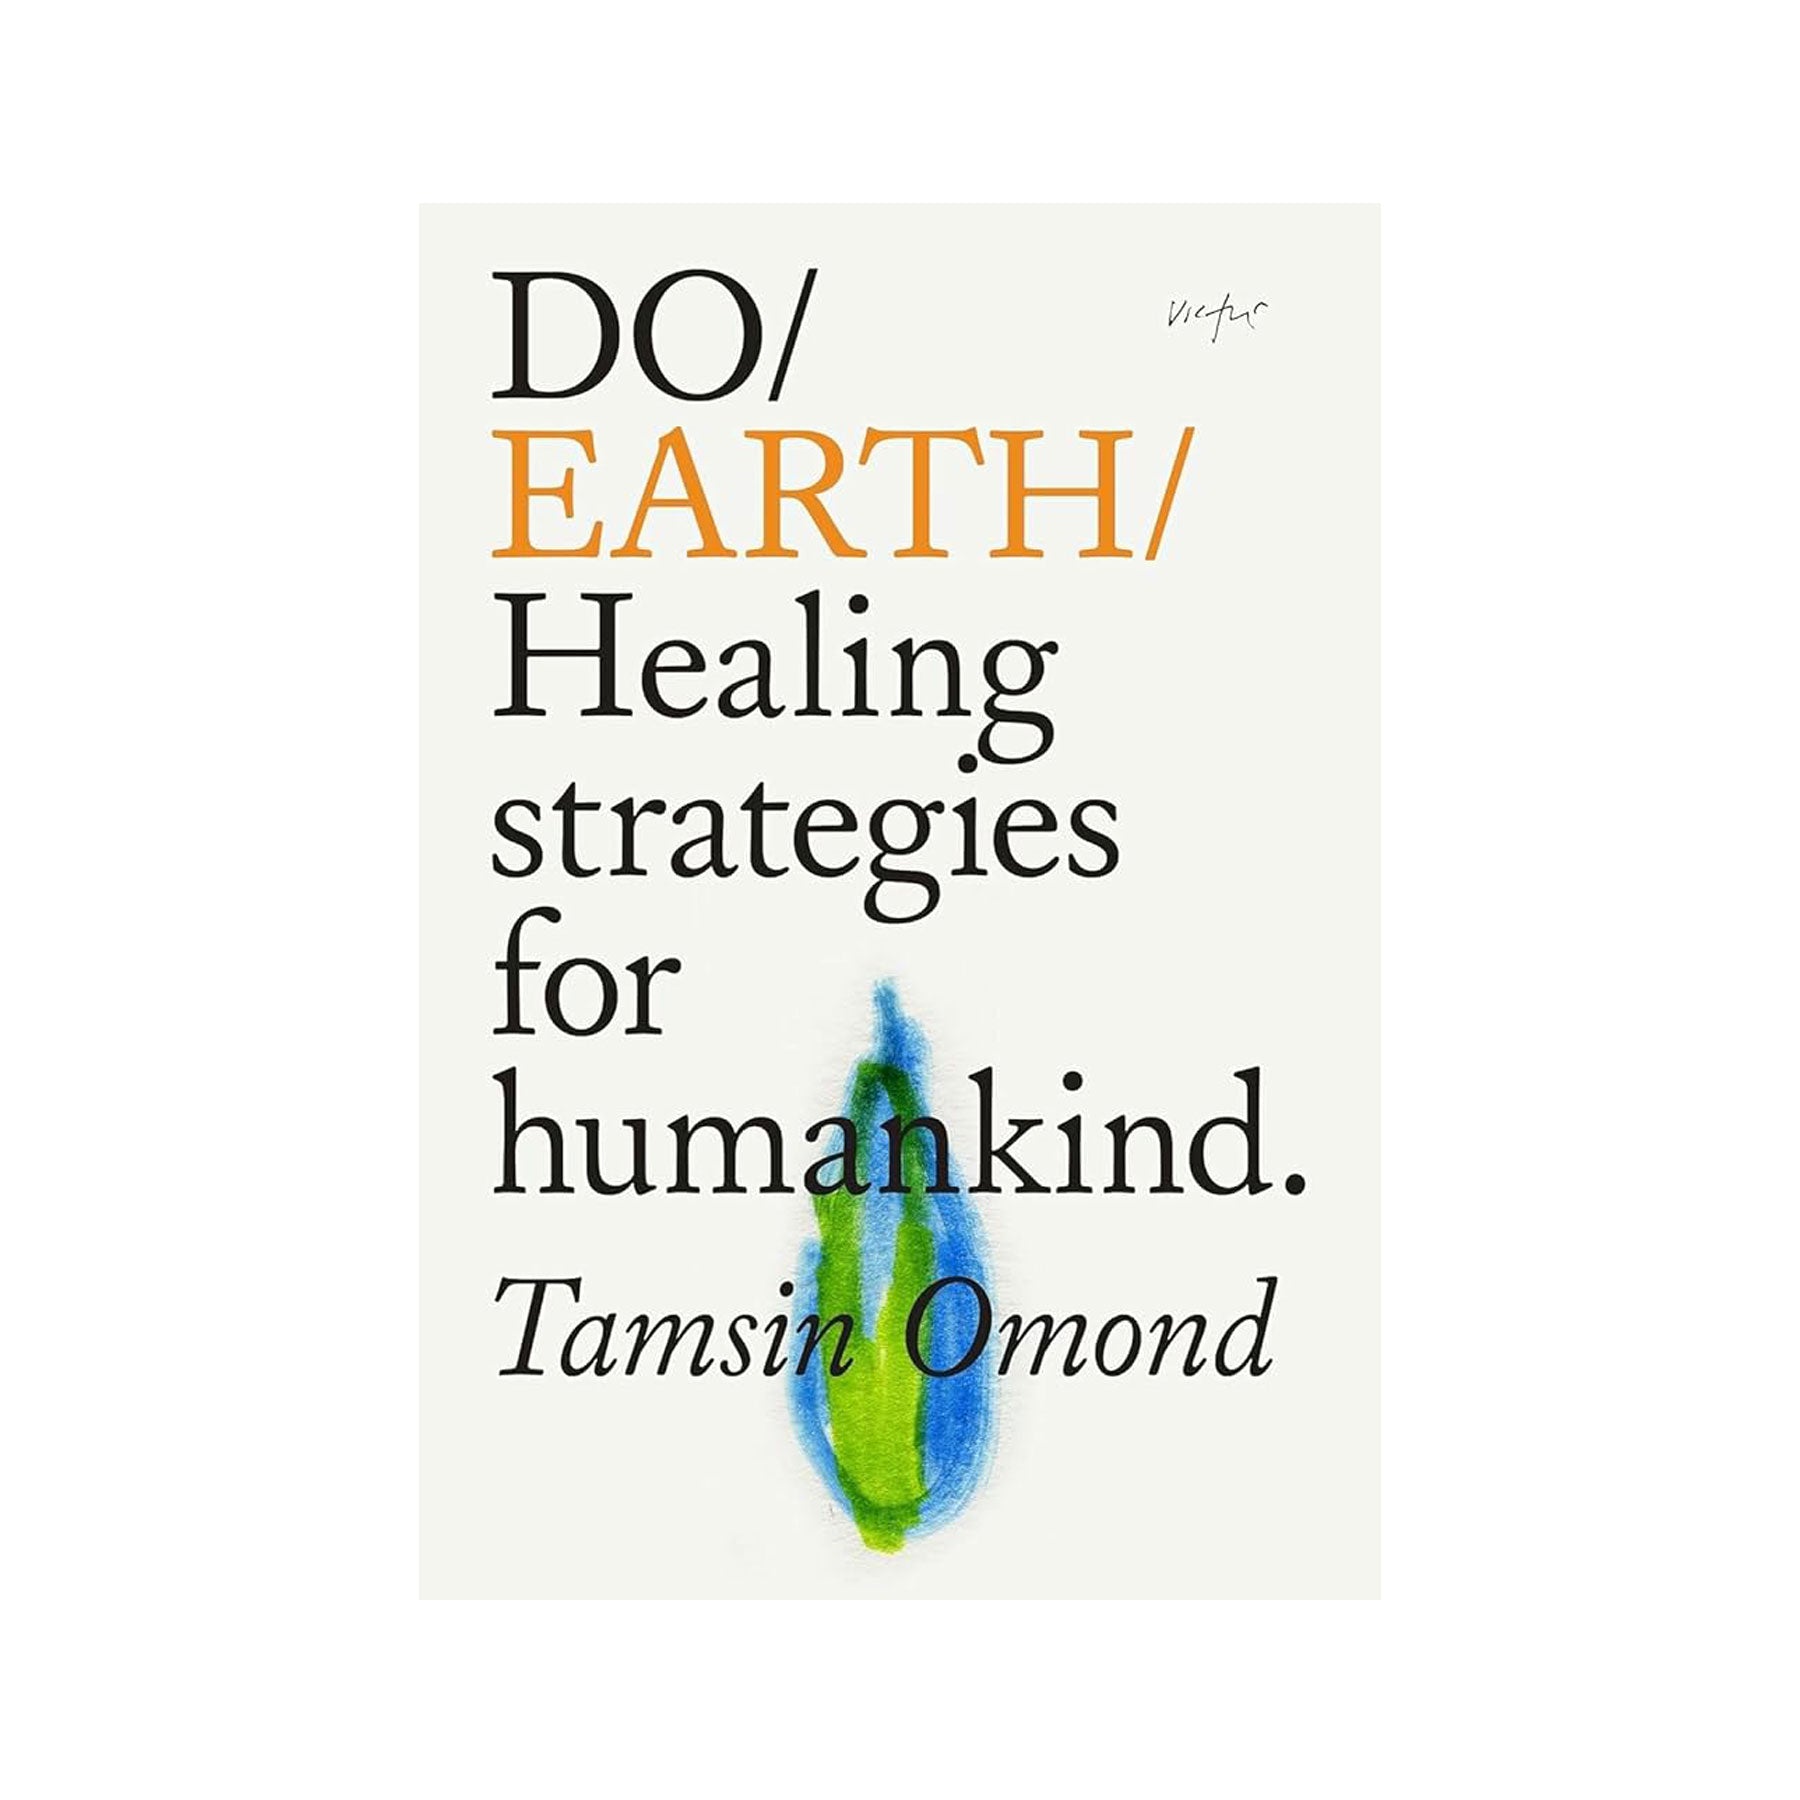 Do Earth: Healing strategies for humankind